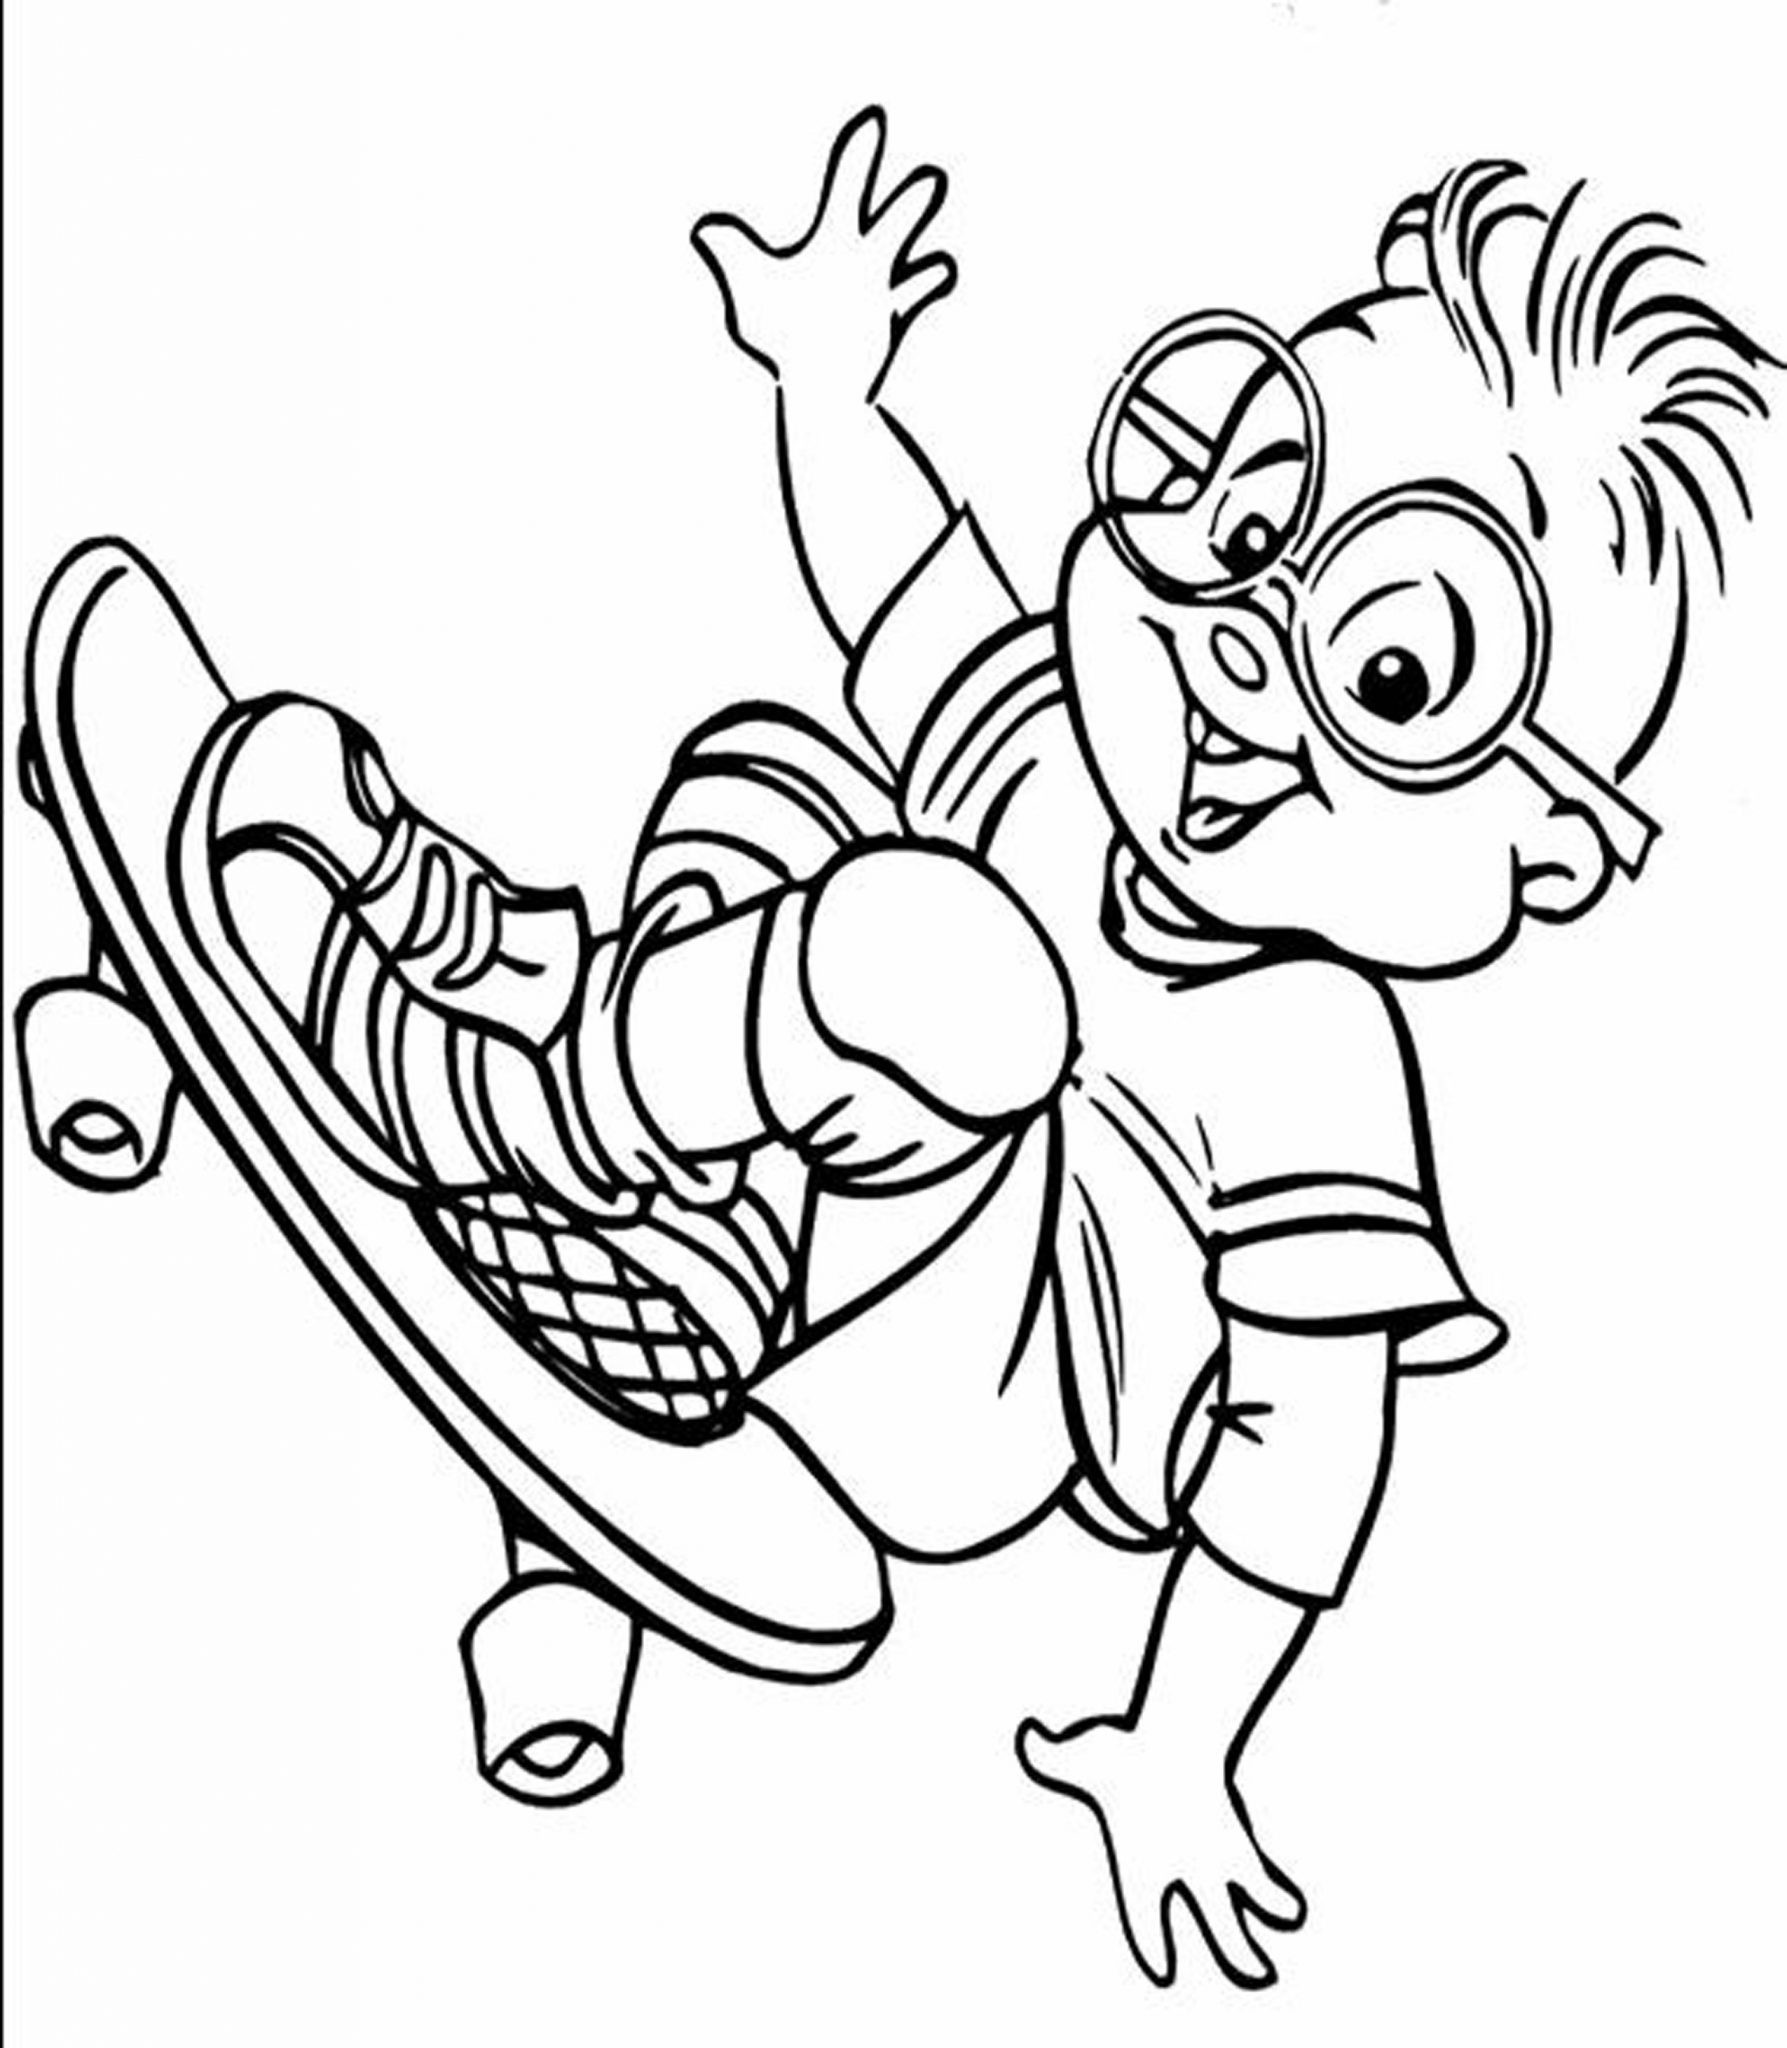 Boys Coloring Pages
 Coloring Pages for Boys & Training Shopping For Children